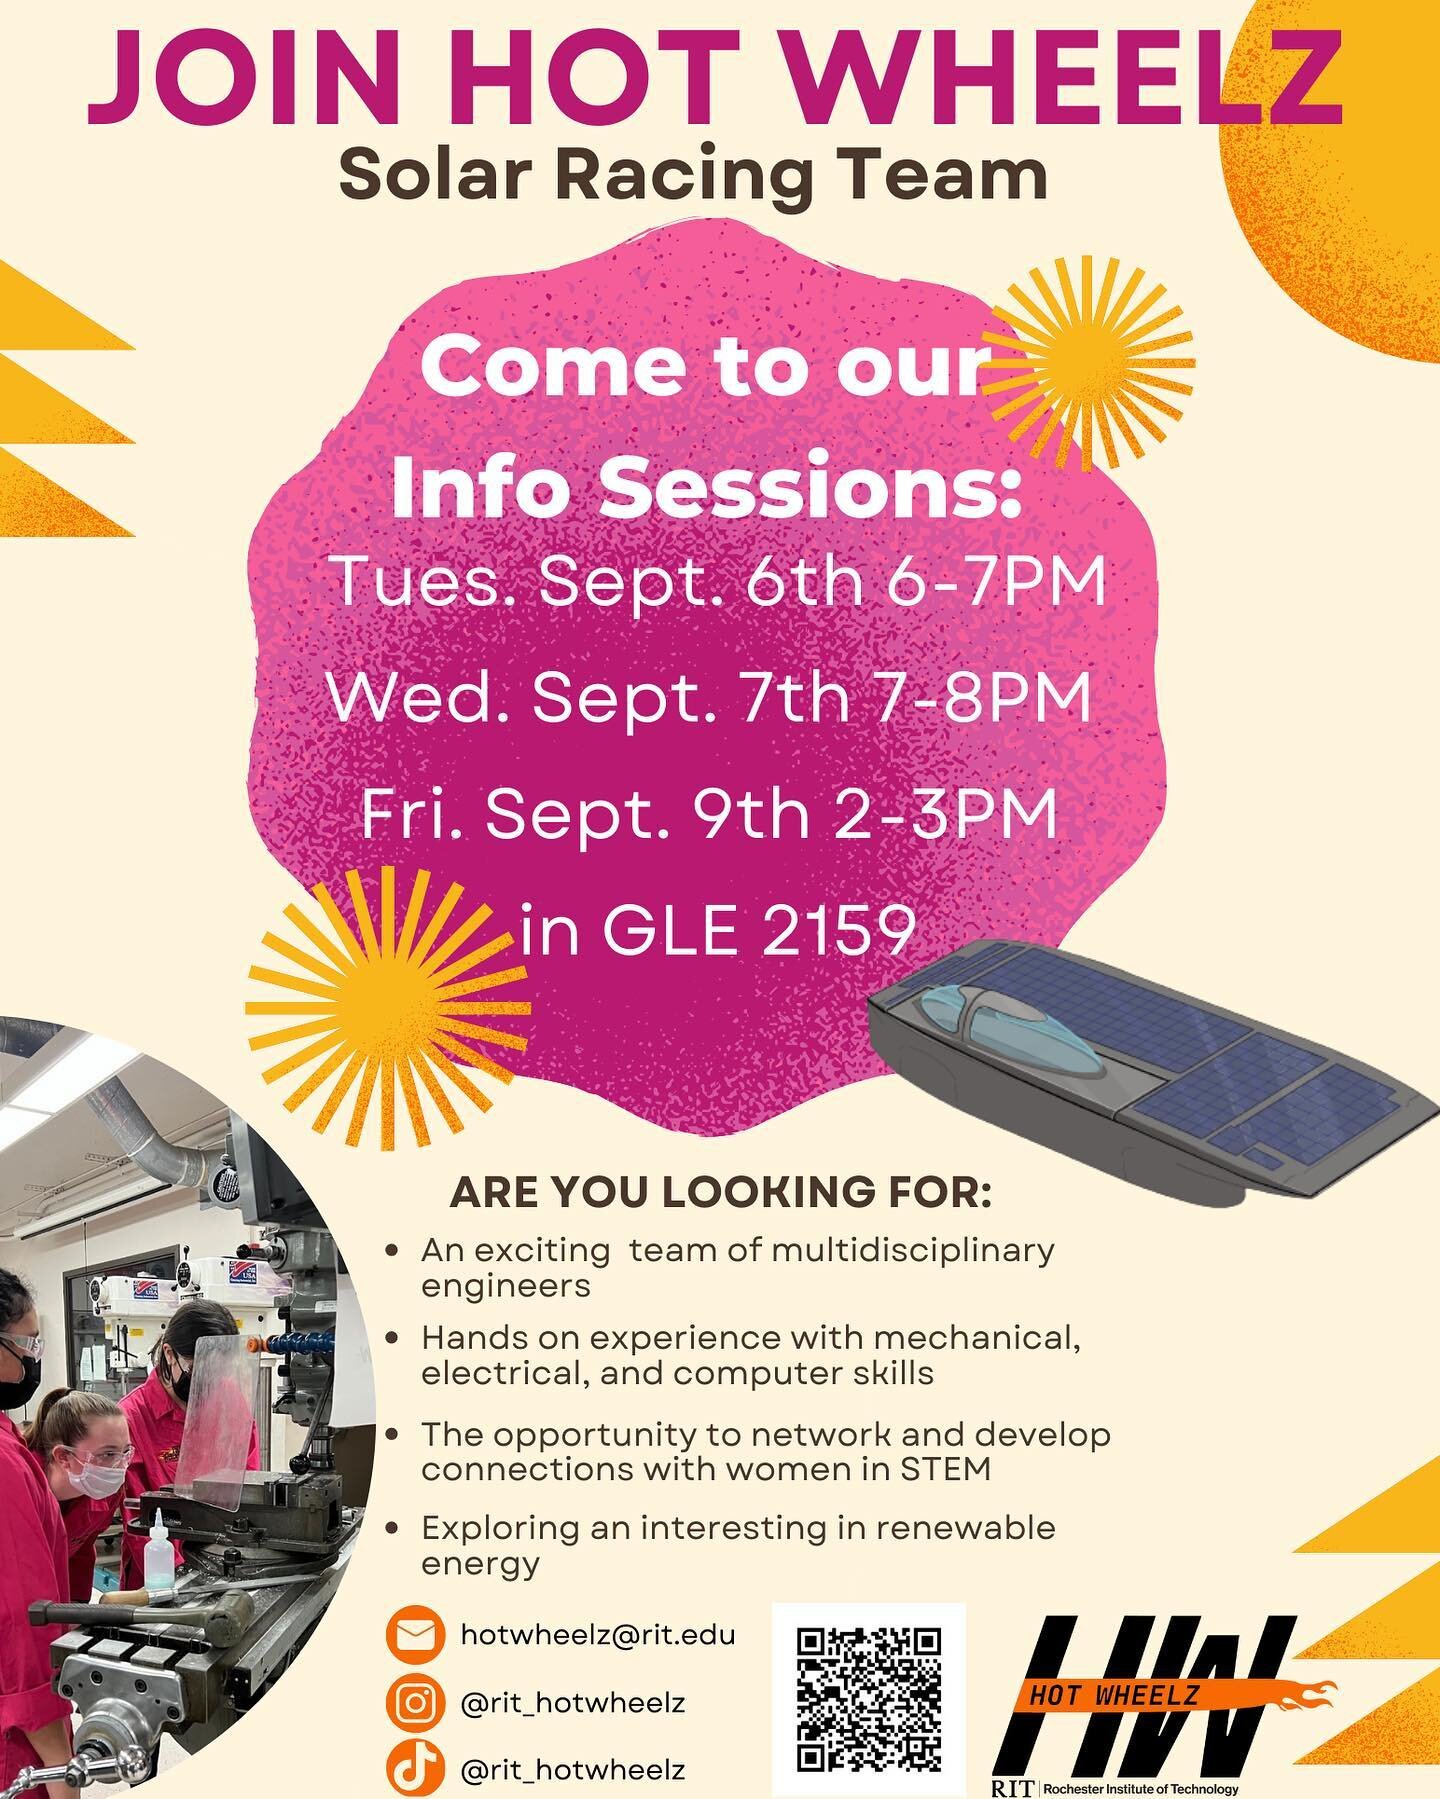 Interested in joining Hot Wheelz? Come to one of our info sessions: Tuesday September 6th from 6-7PM, Wednesday September 7th from 6-7PM, and Saturday September 9th from 2-3PM. There are opportunities for all majors so come and see what we are all ab